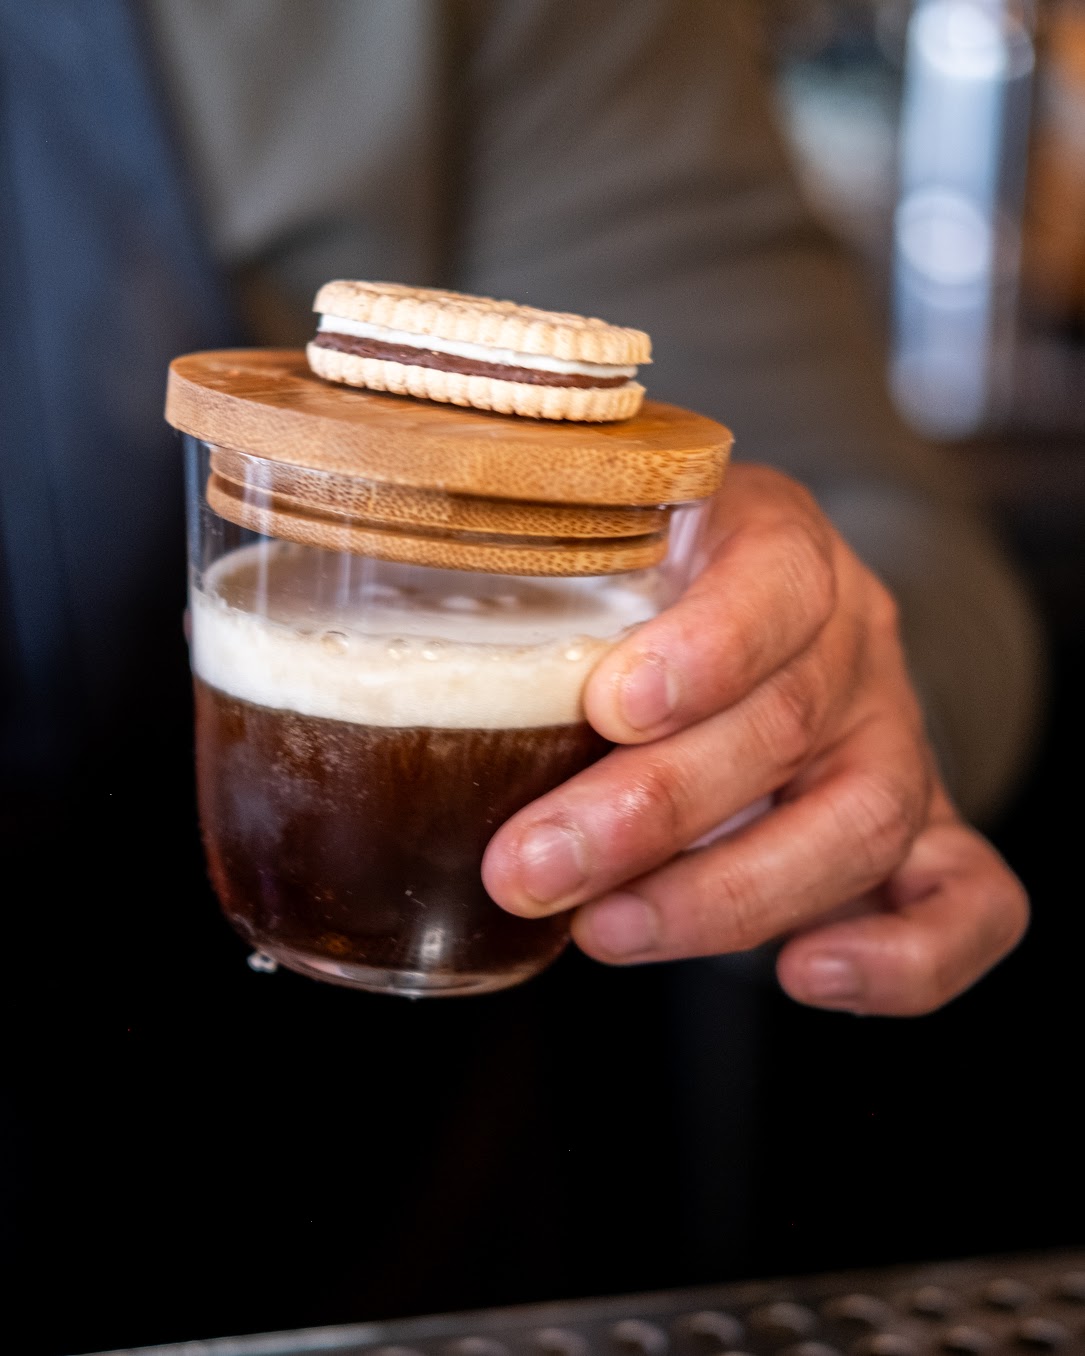 a cocktail made using ingredients from Girl Scout cookies is displayed at a bar